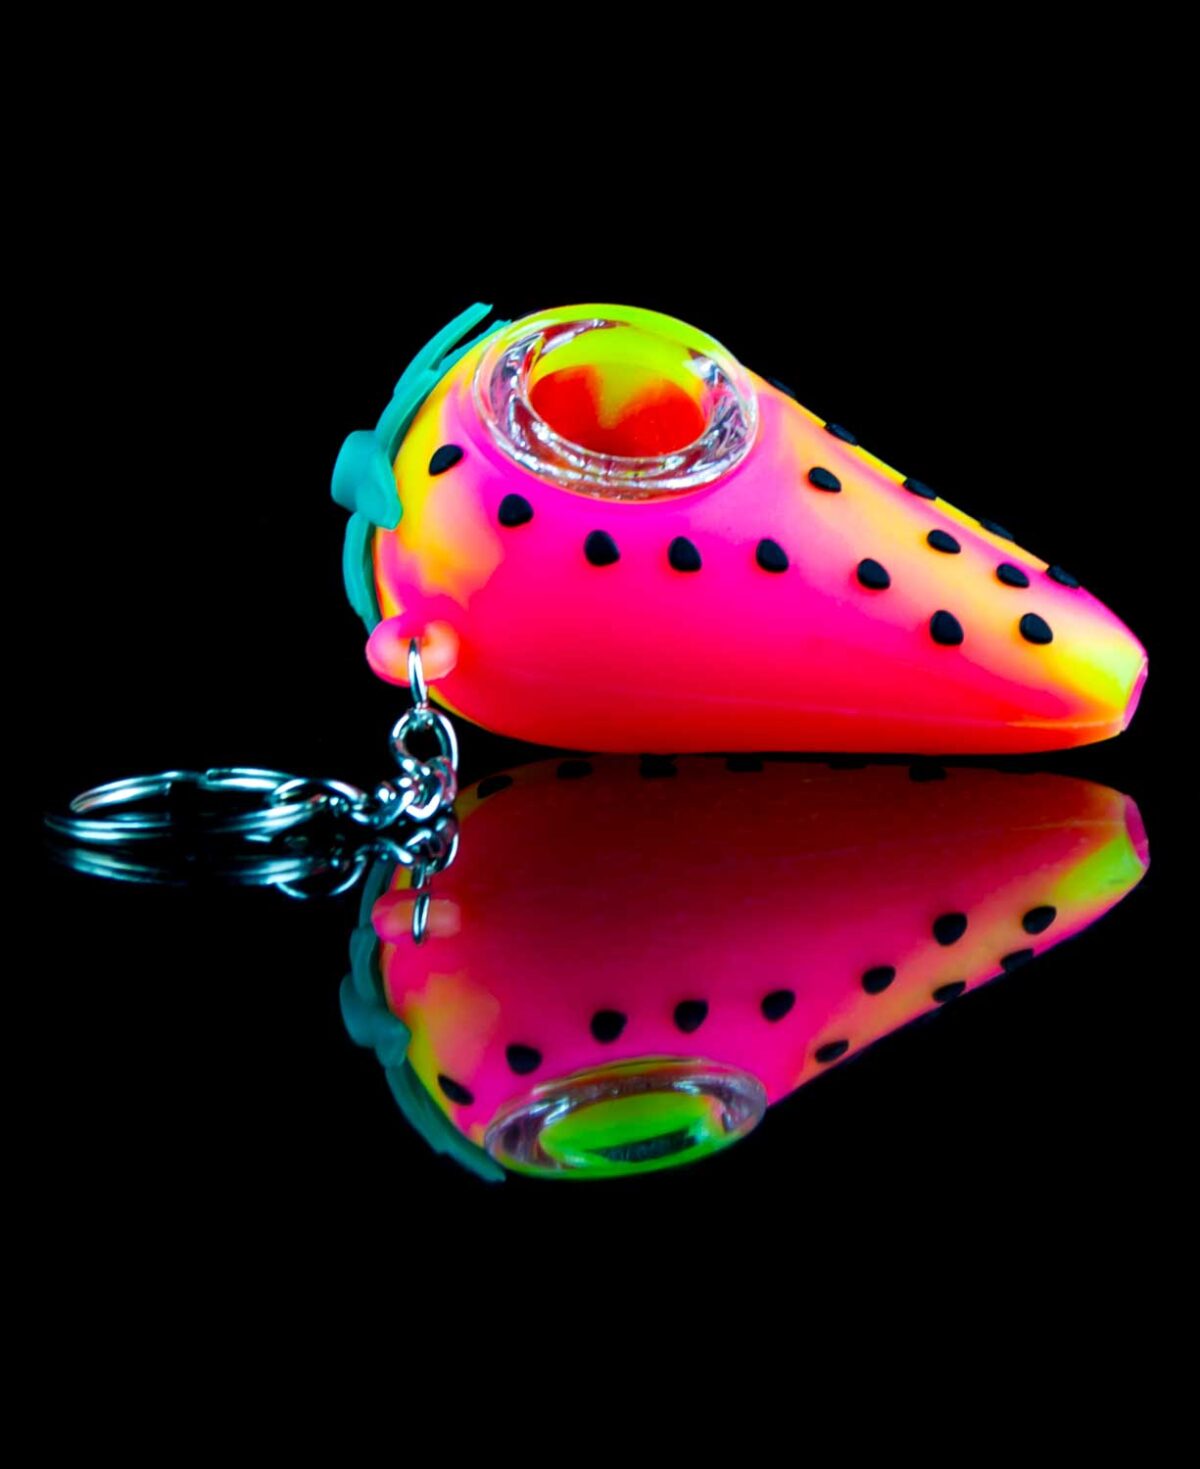 silicone pipe with glass bowl shaped like a strawberry in pink and yellow